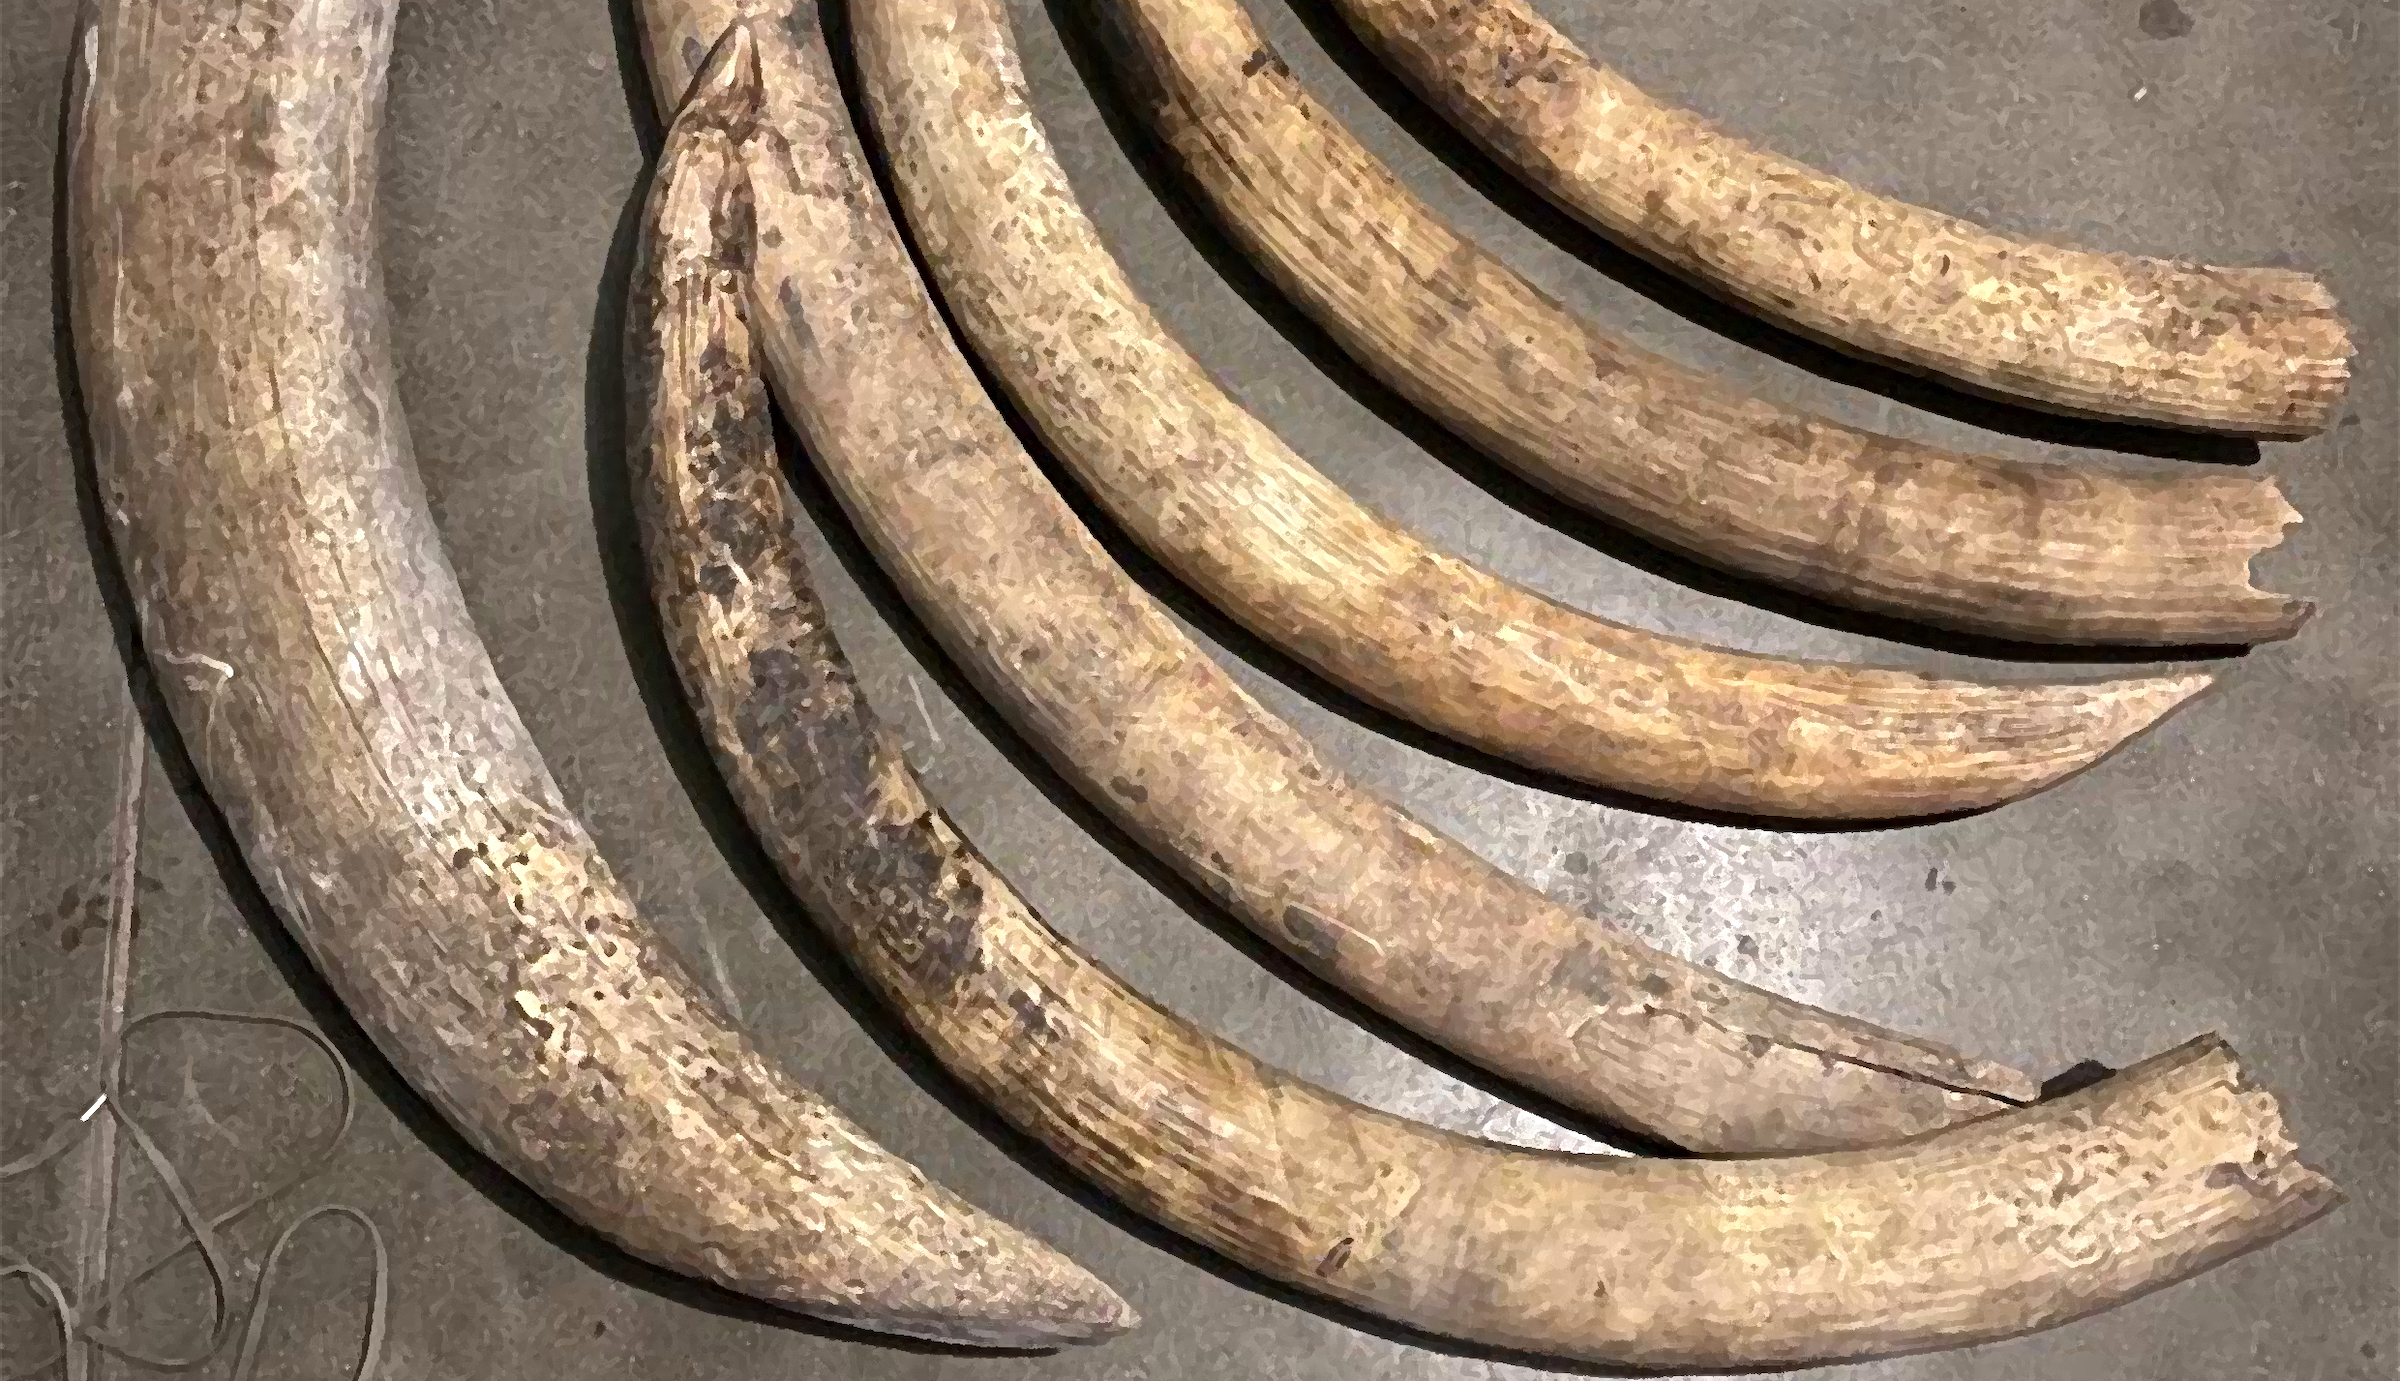 A number of confiscated elephant tusks.